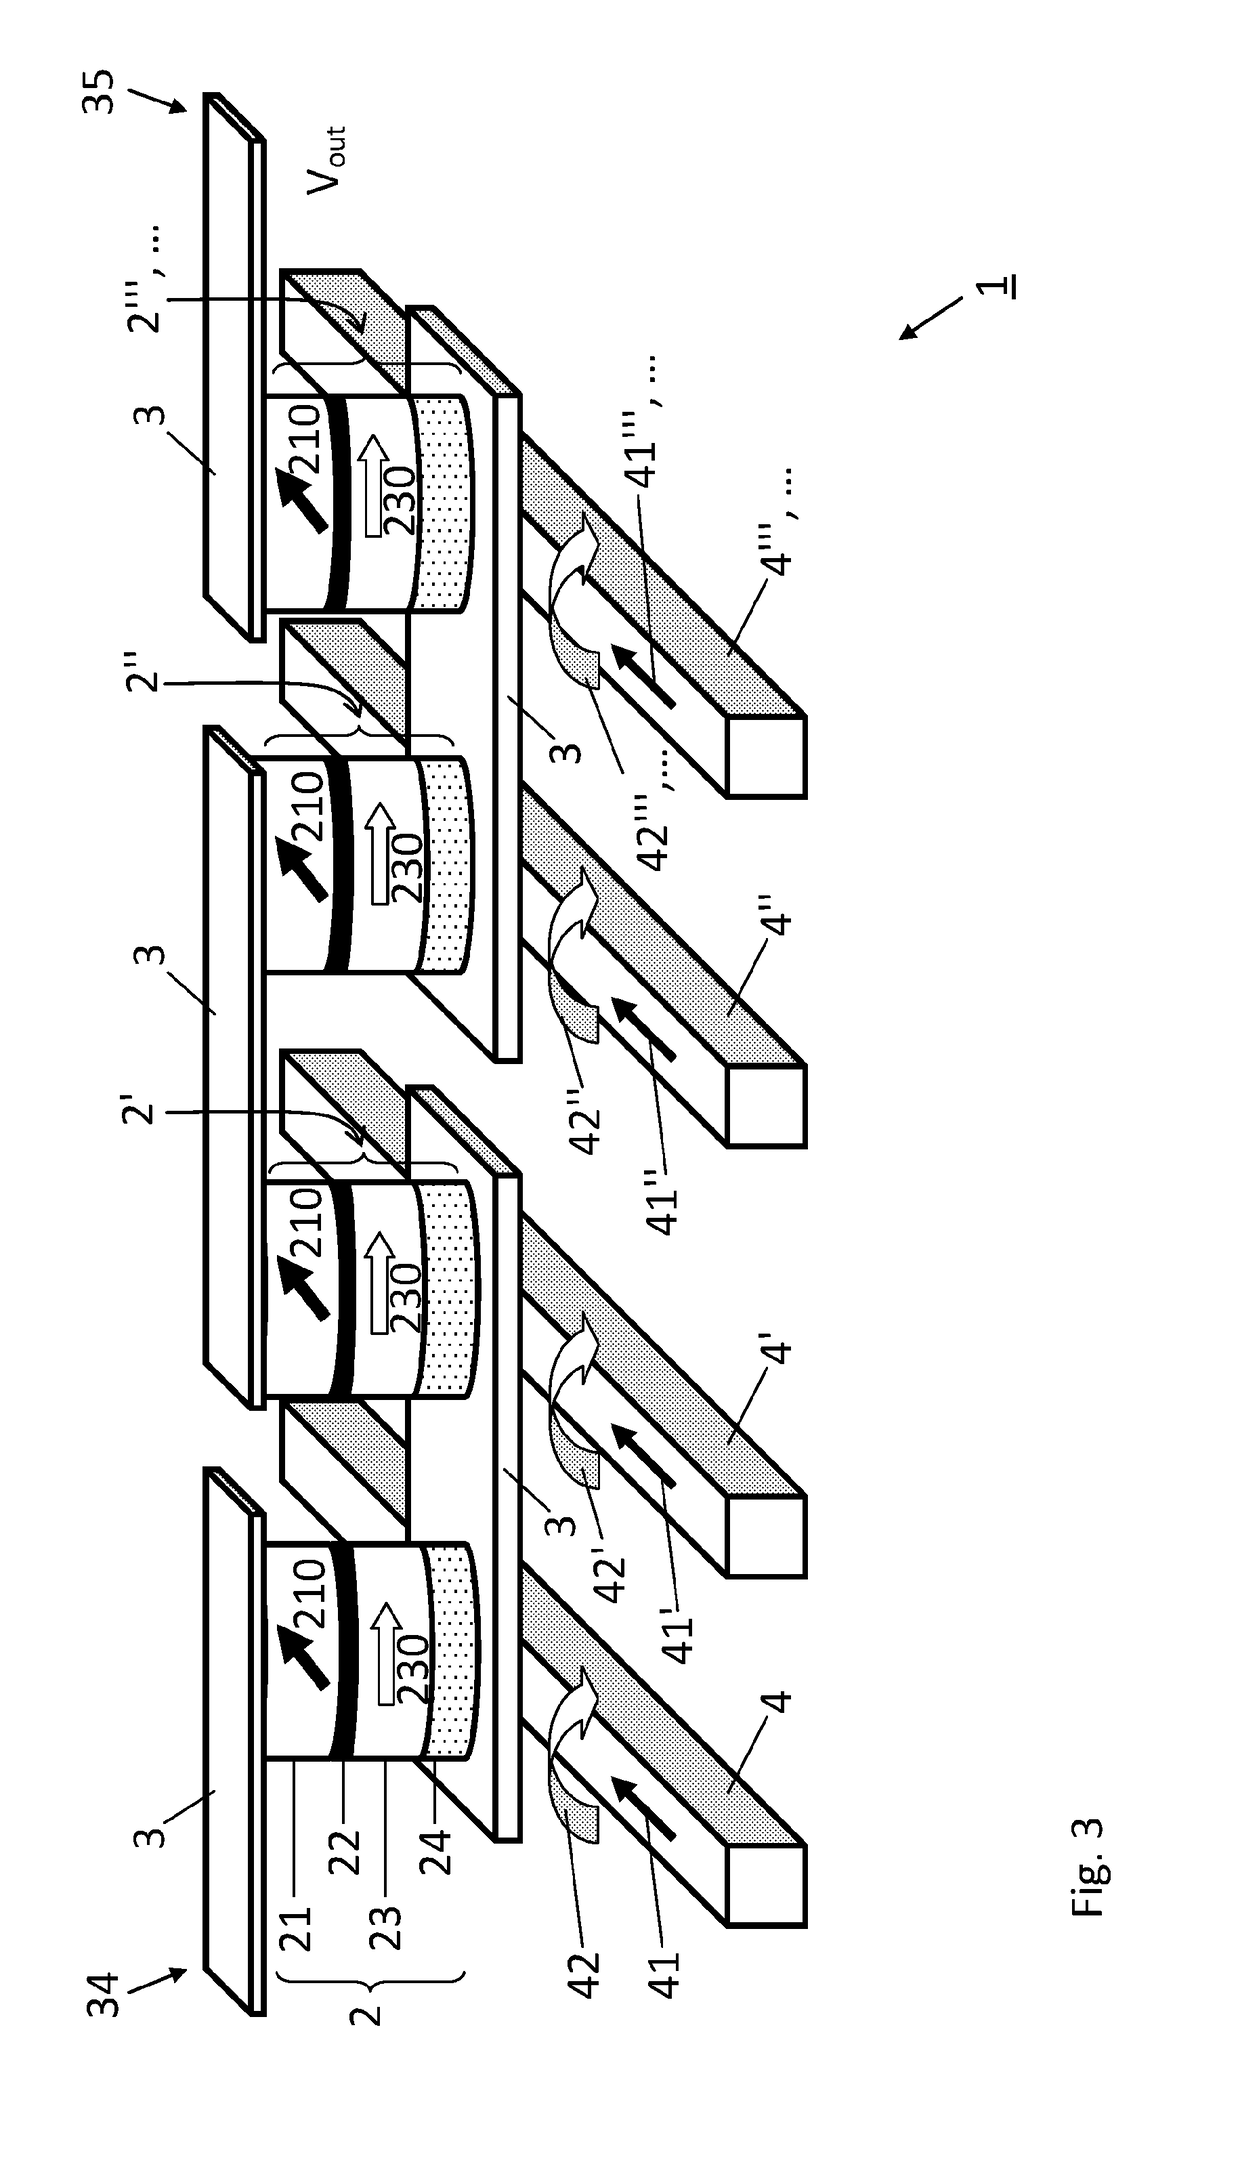 Magnetic device configured to perform an analog adder circuit function and method for operating such magnetic device